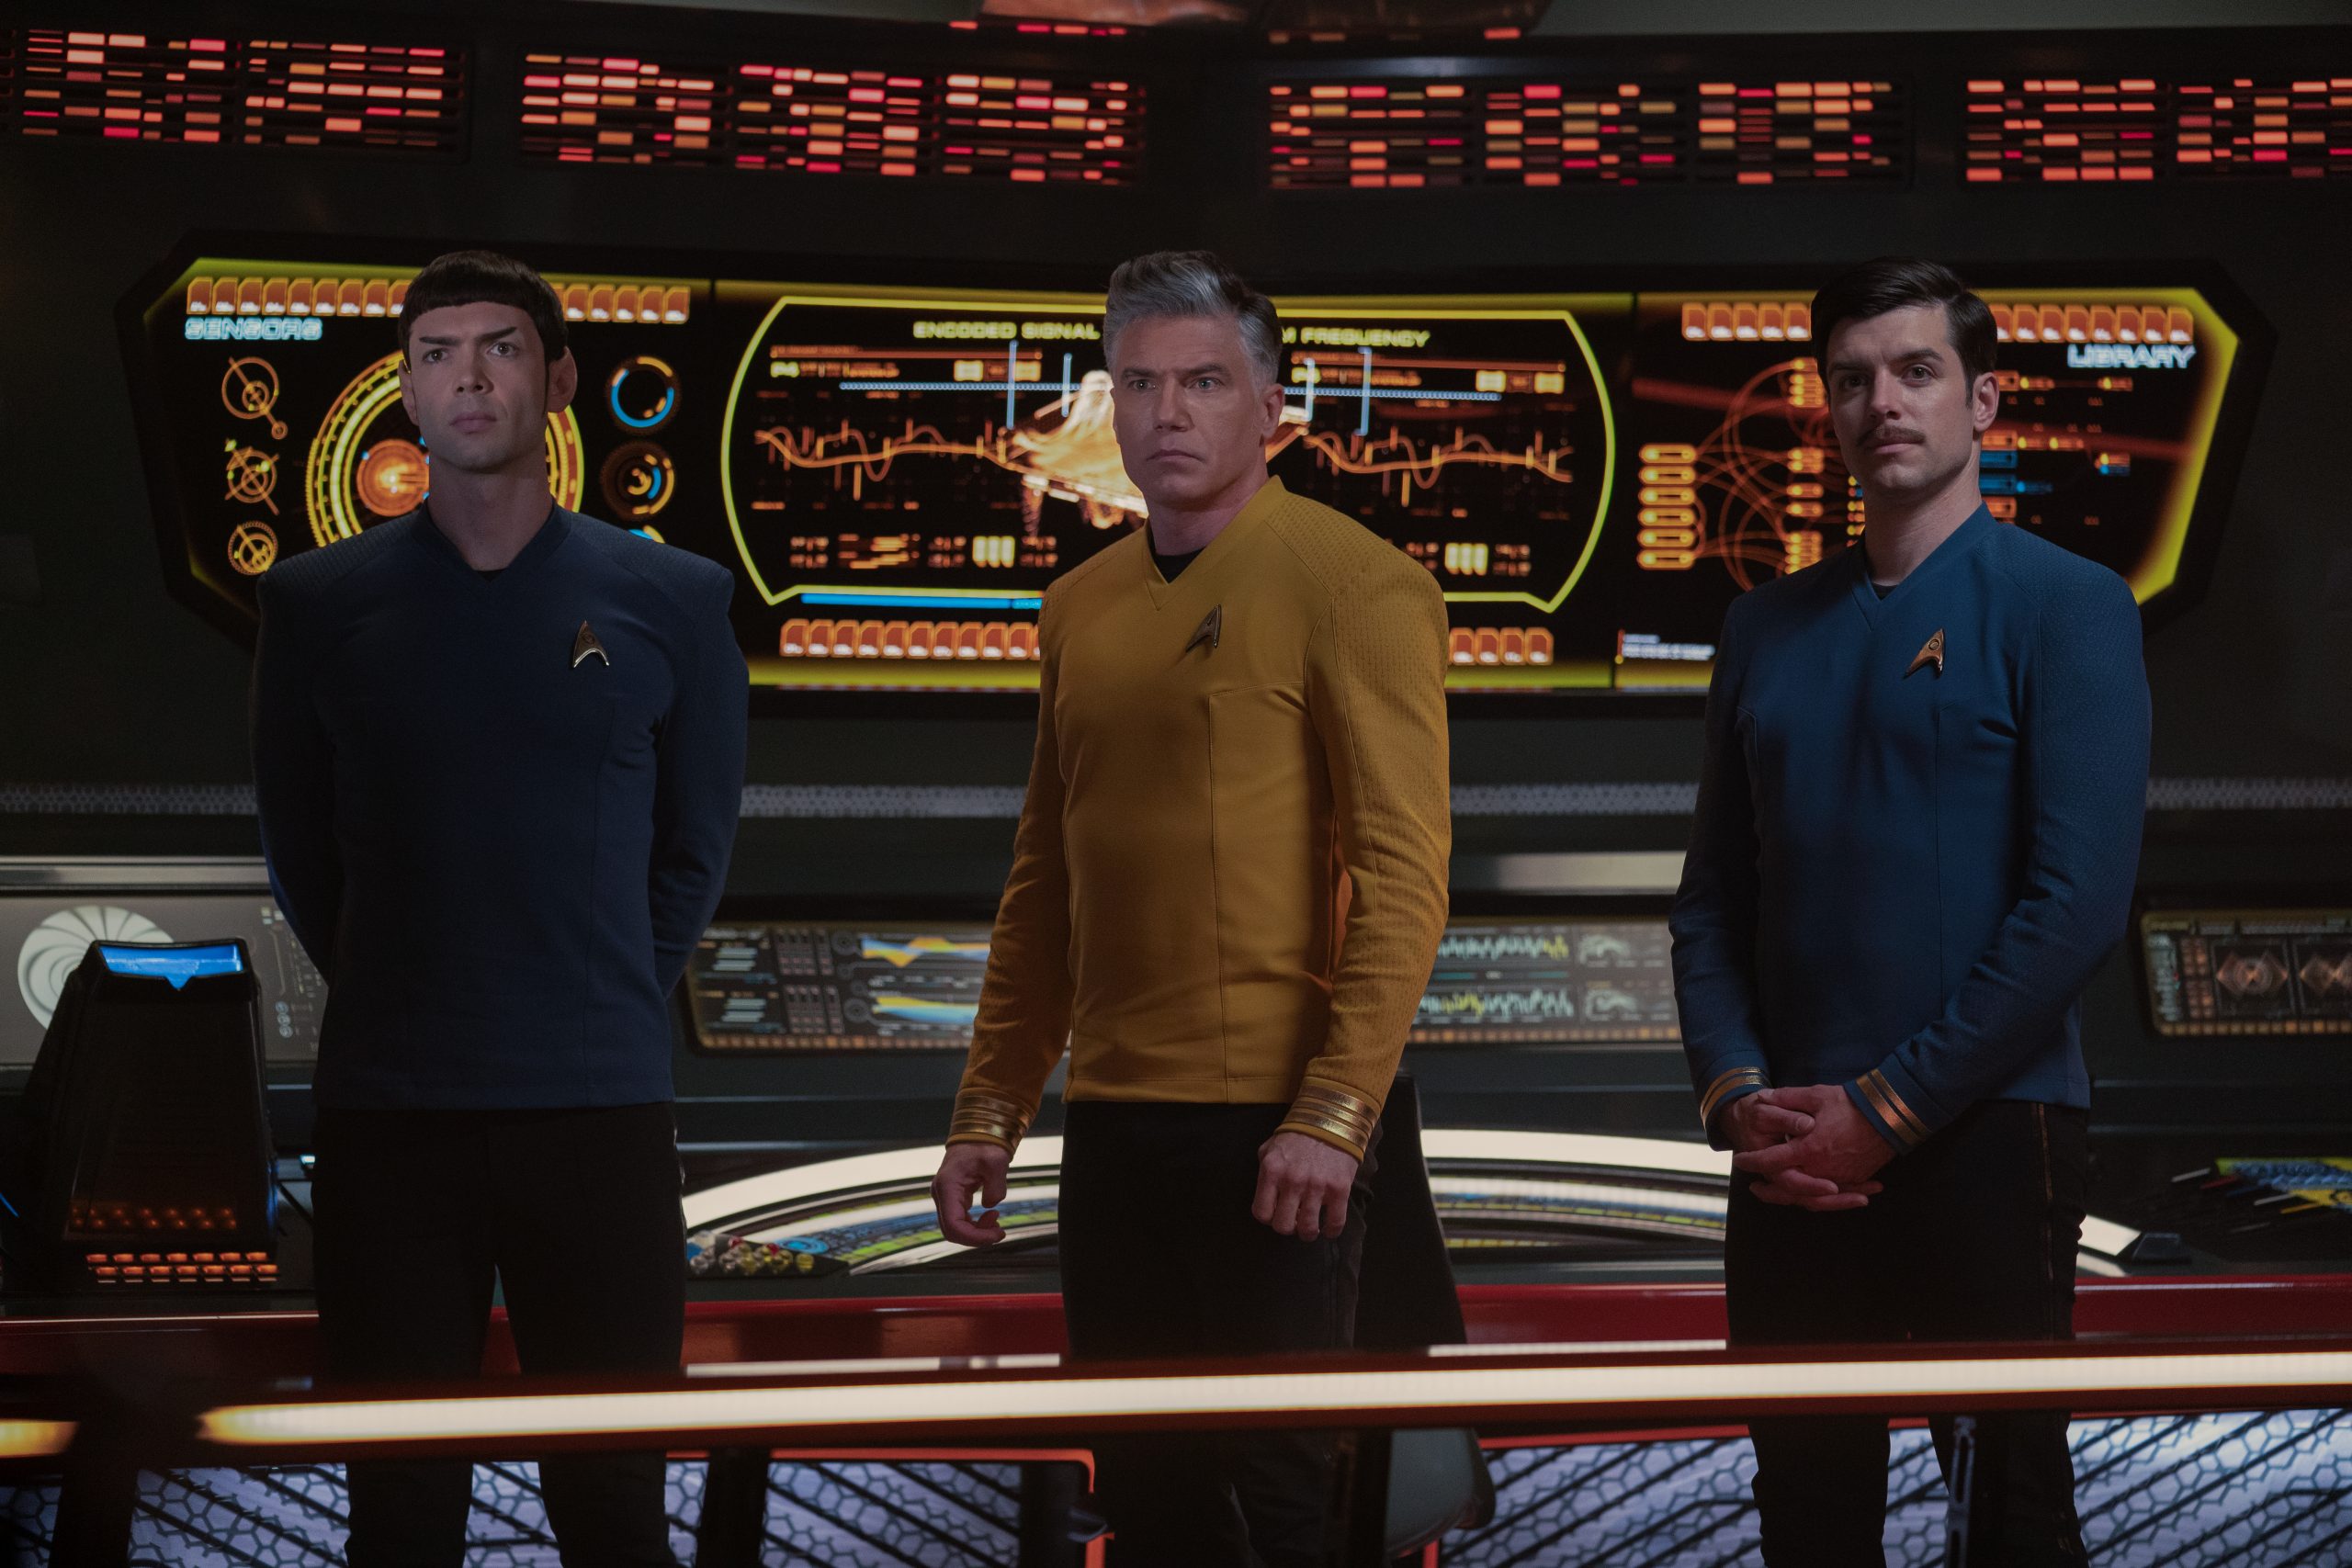 Ethan Peck as Spock, Anson Mount as Pike, and Dan Jeannotte as Samuel Kirk